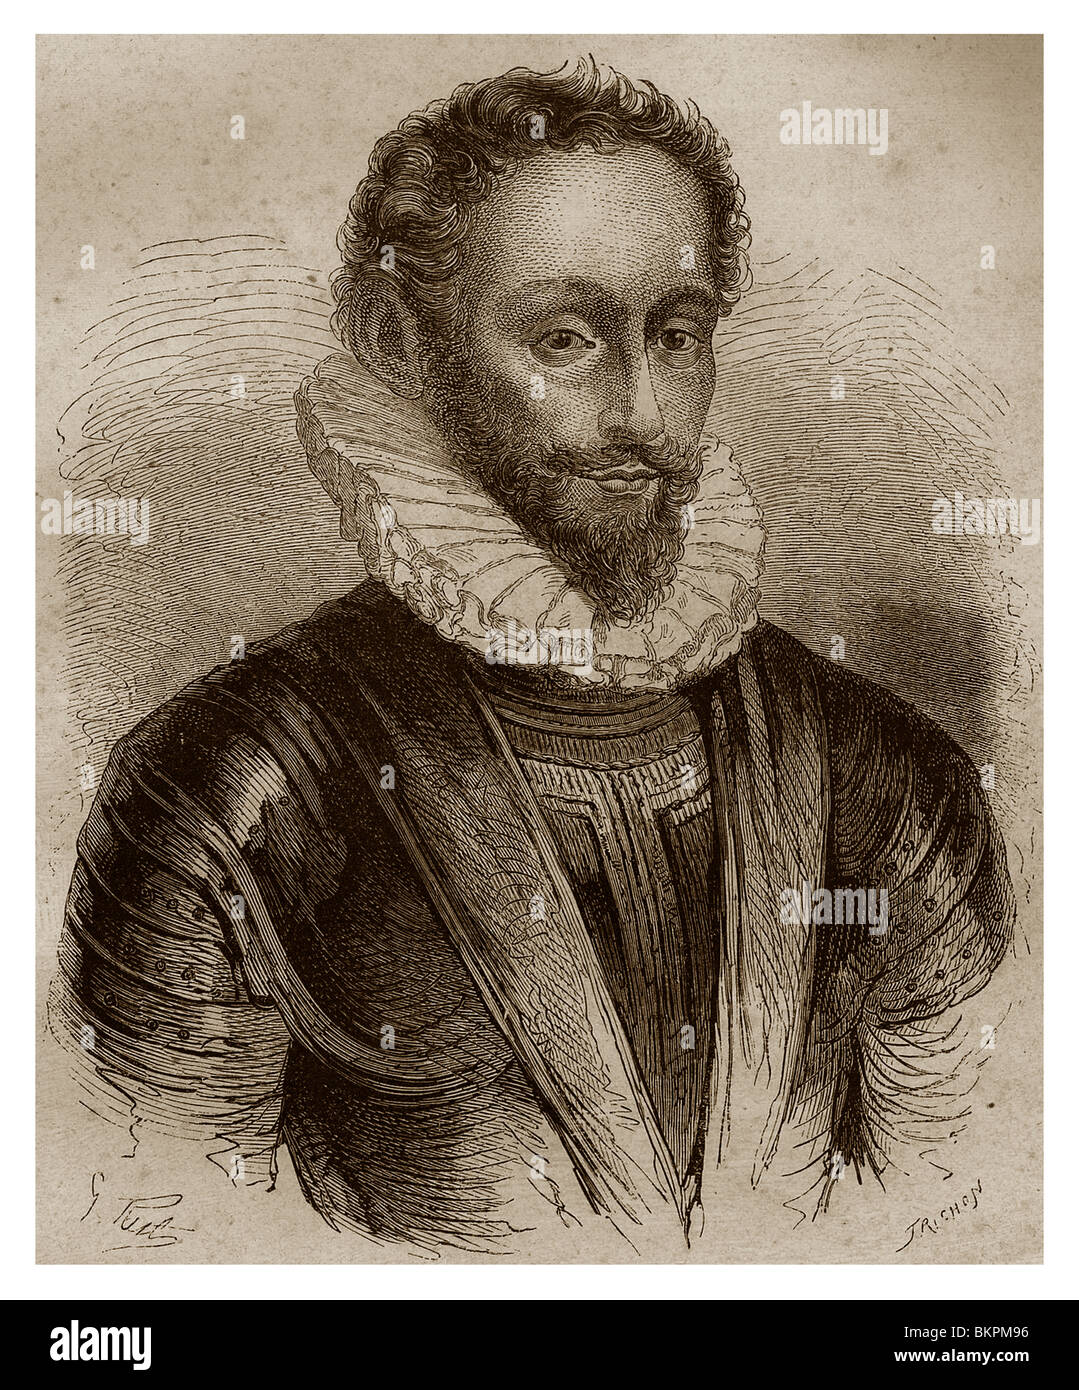 Jean Louis de Nogaret of Valetta, Duke of Épernon (1554-1642): French serviceman and mignon of King Henry III of France. Stock Photo